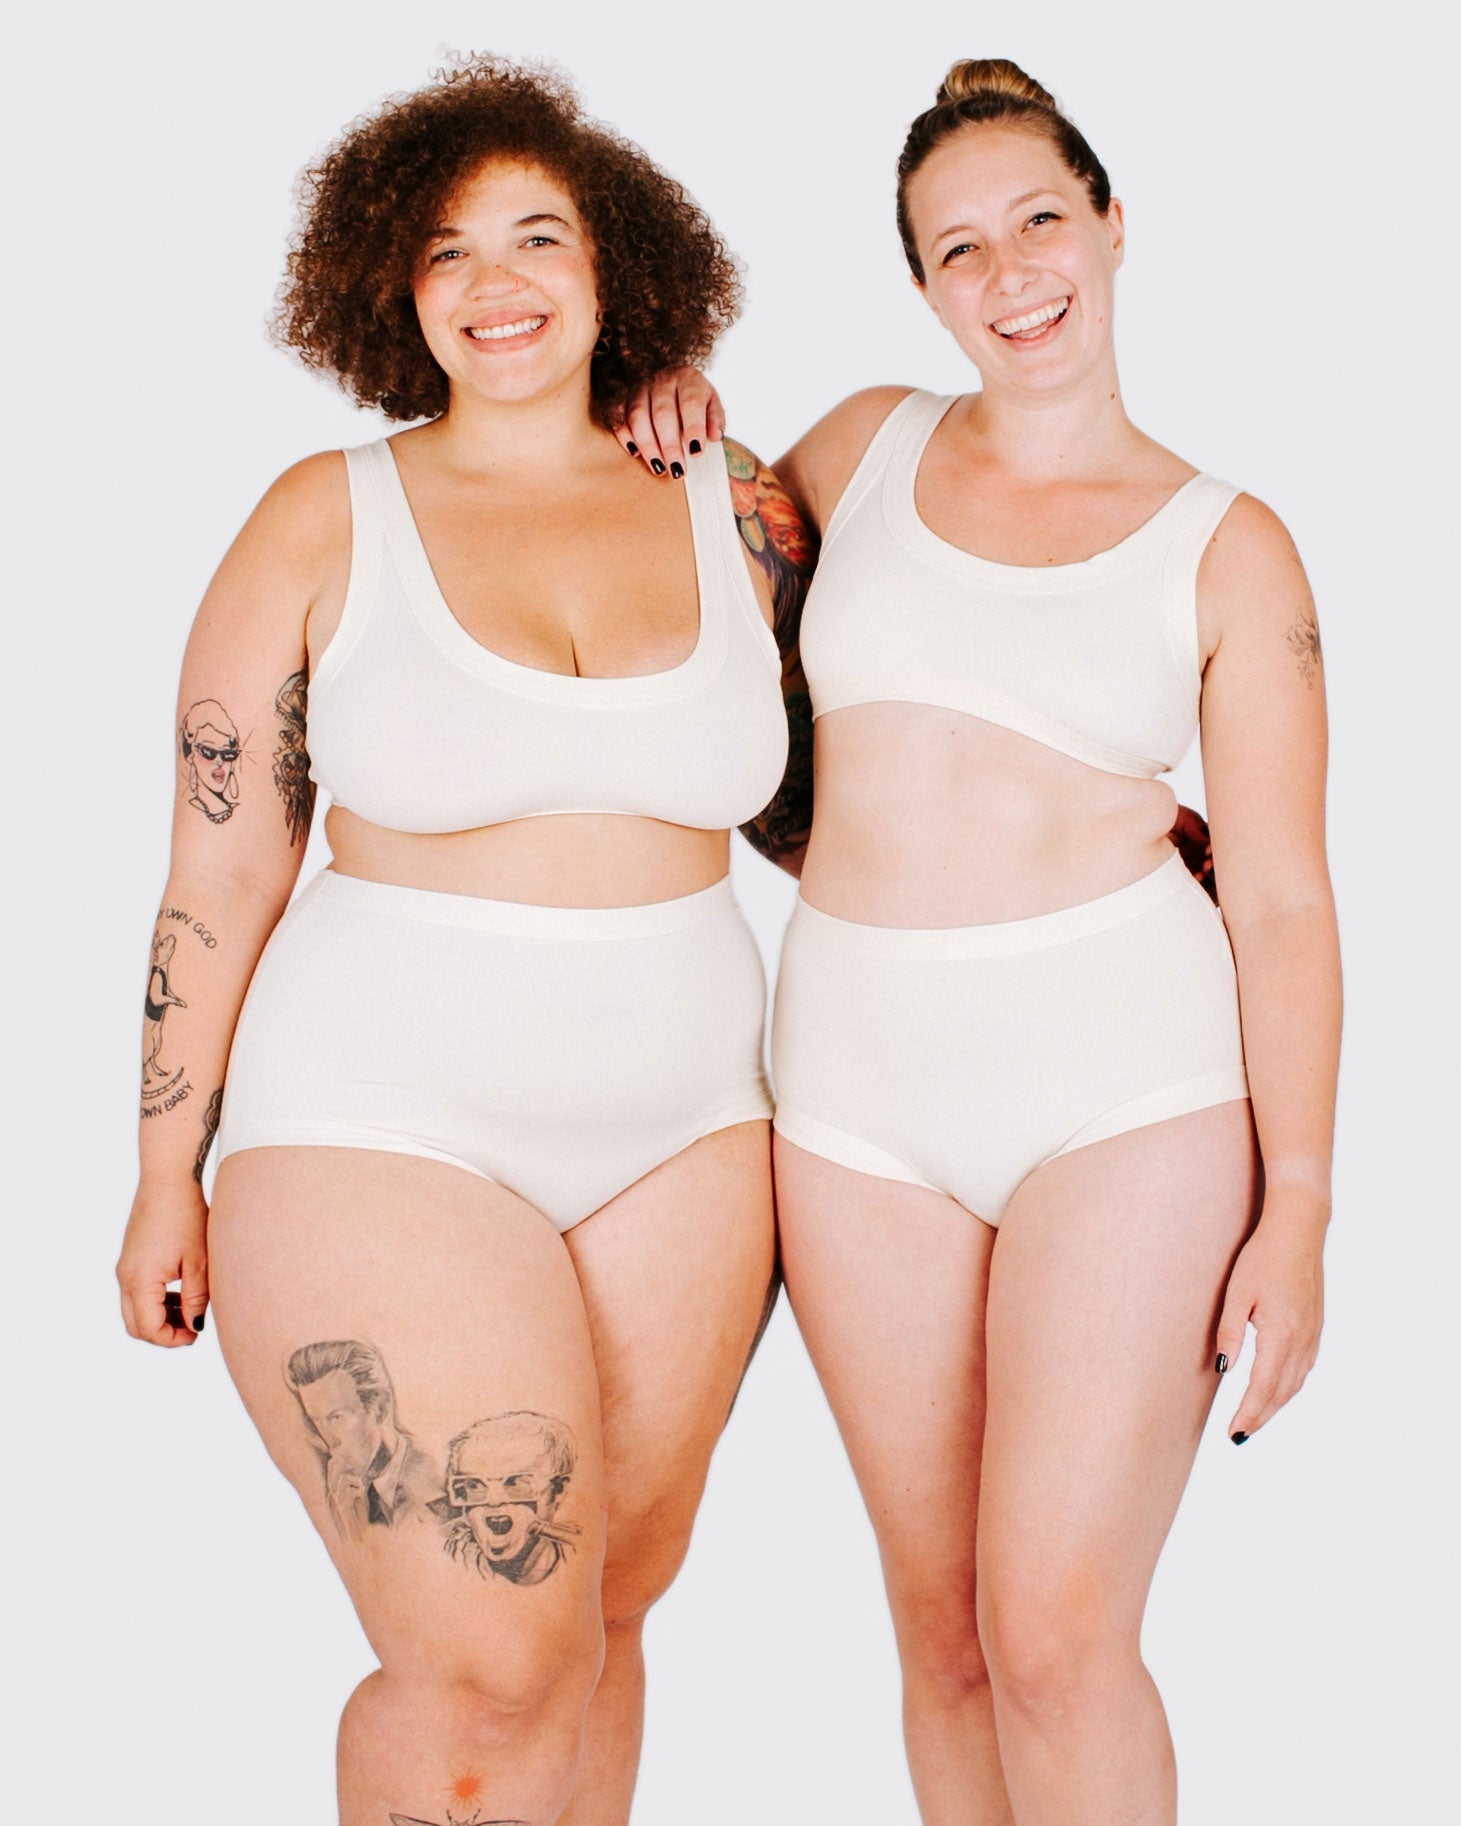 Fit photo from the front of Thunderpants organic cotton Original style underwear and Bralette in off-white on two model standing together.